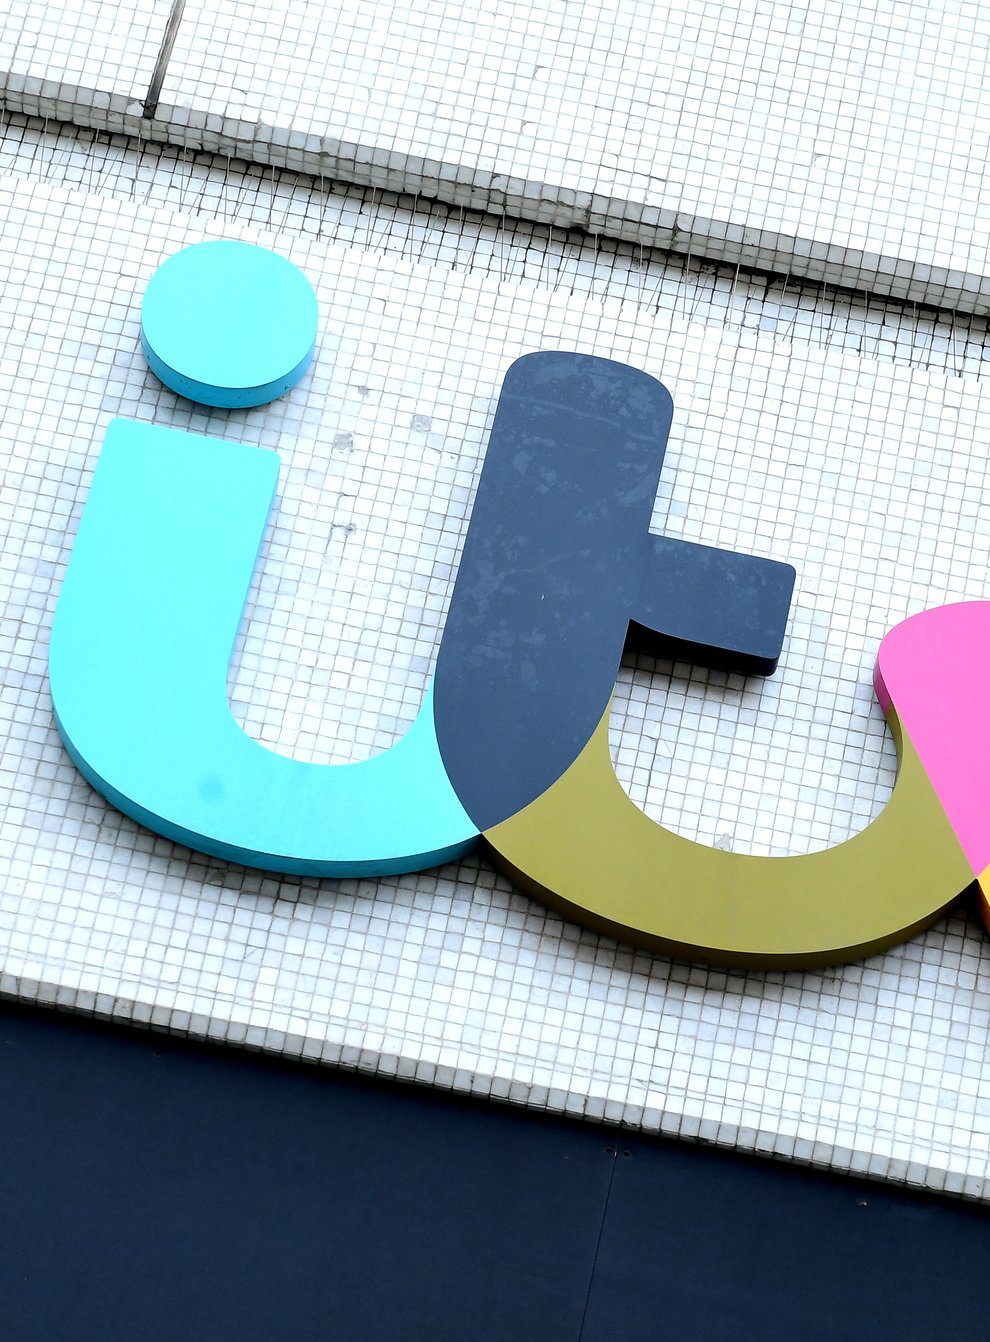 Broadcaster ITV has unveiled plans for a new on-demand platform called ITVX amid aims to double its digital sales by 2026 after posting a leap in annual profits (Ian West/PA)